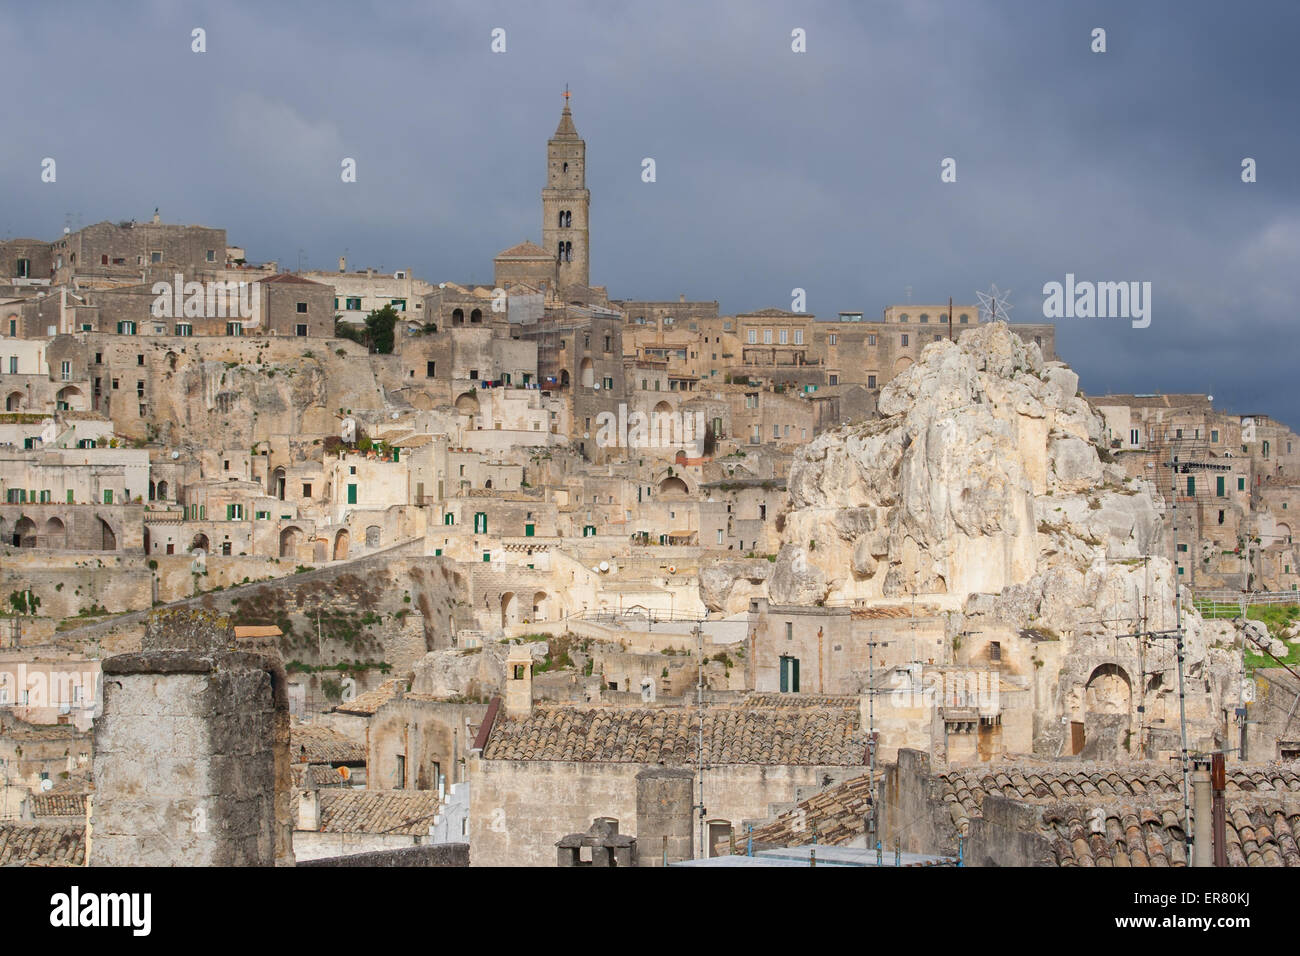 View of Matera capital of basilicata in a cloudy sky day Stock Photo